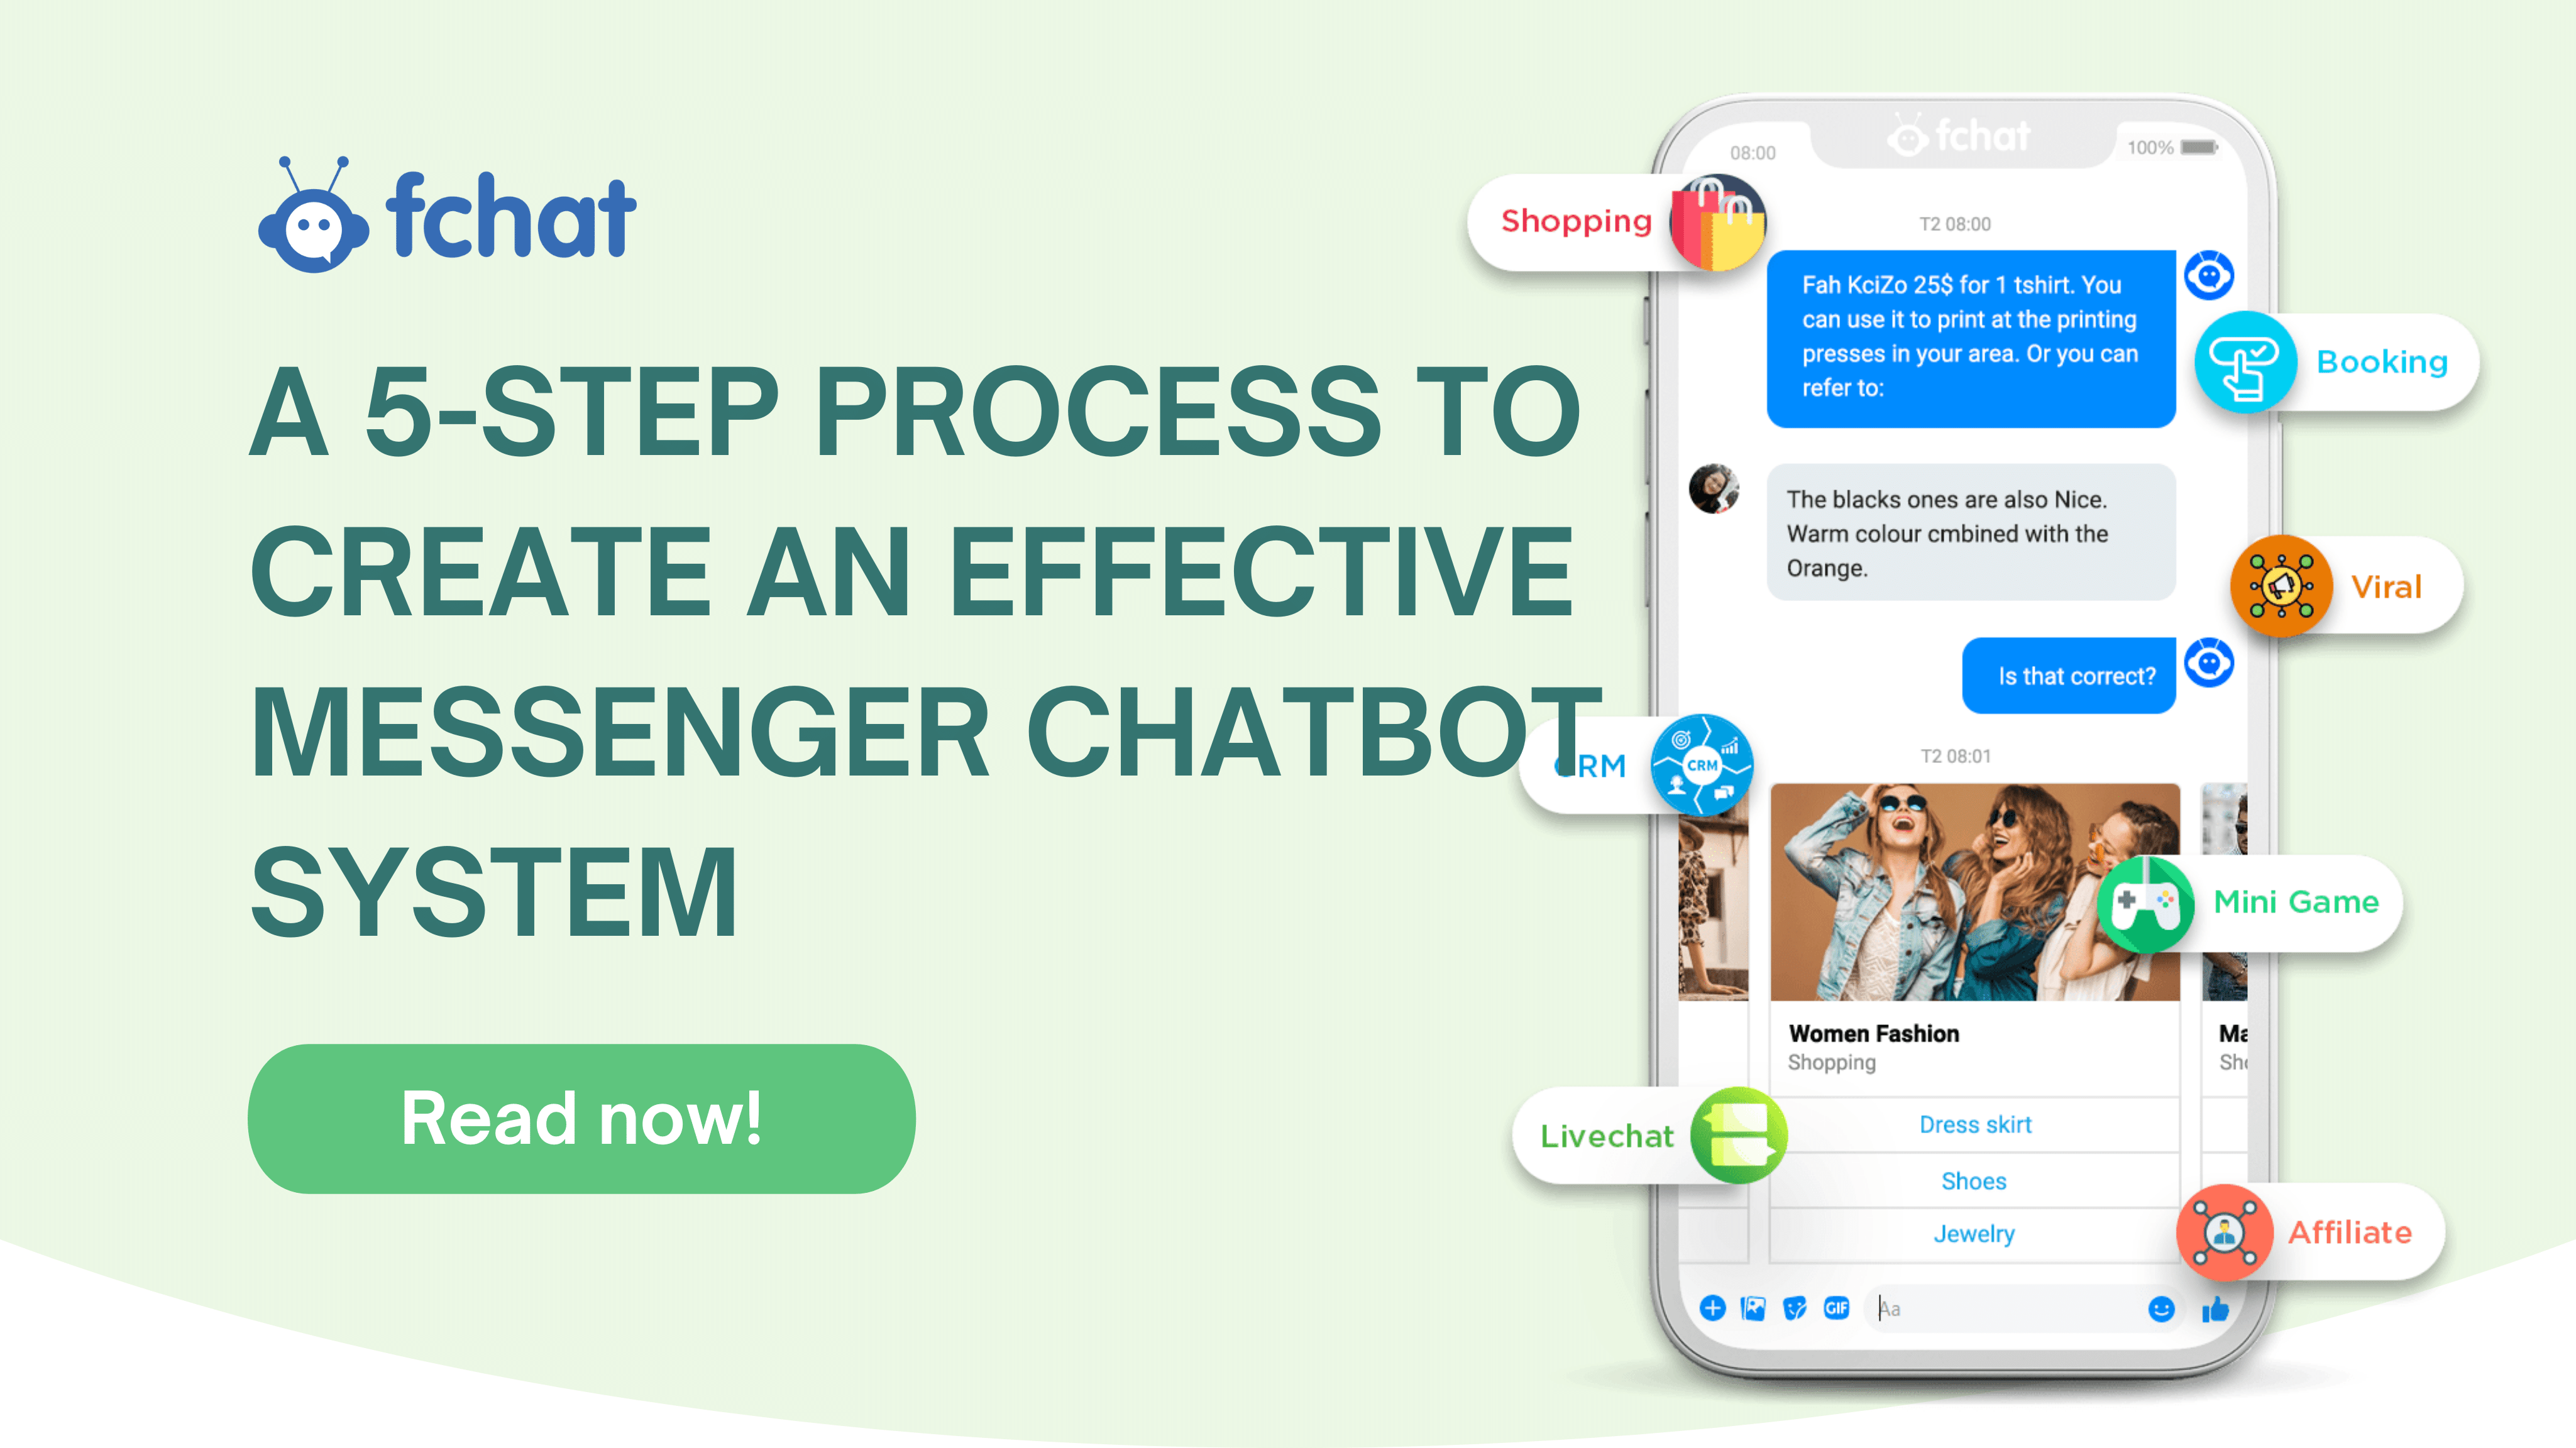 A 5-STEP PROCESS TO CREATE AN EFFECTIVE MESSENGER CHATBOT SYSTEM